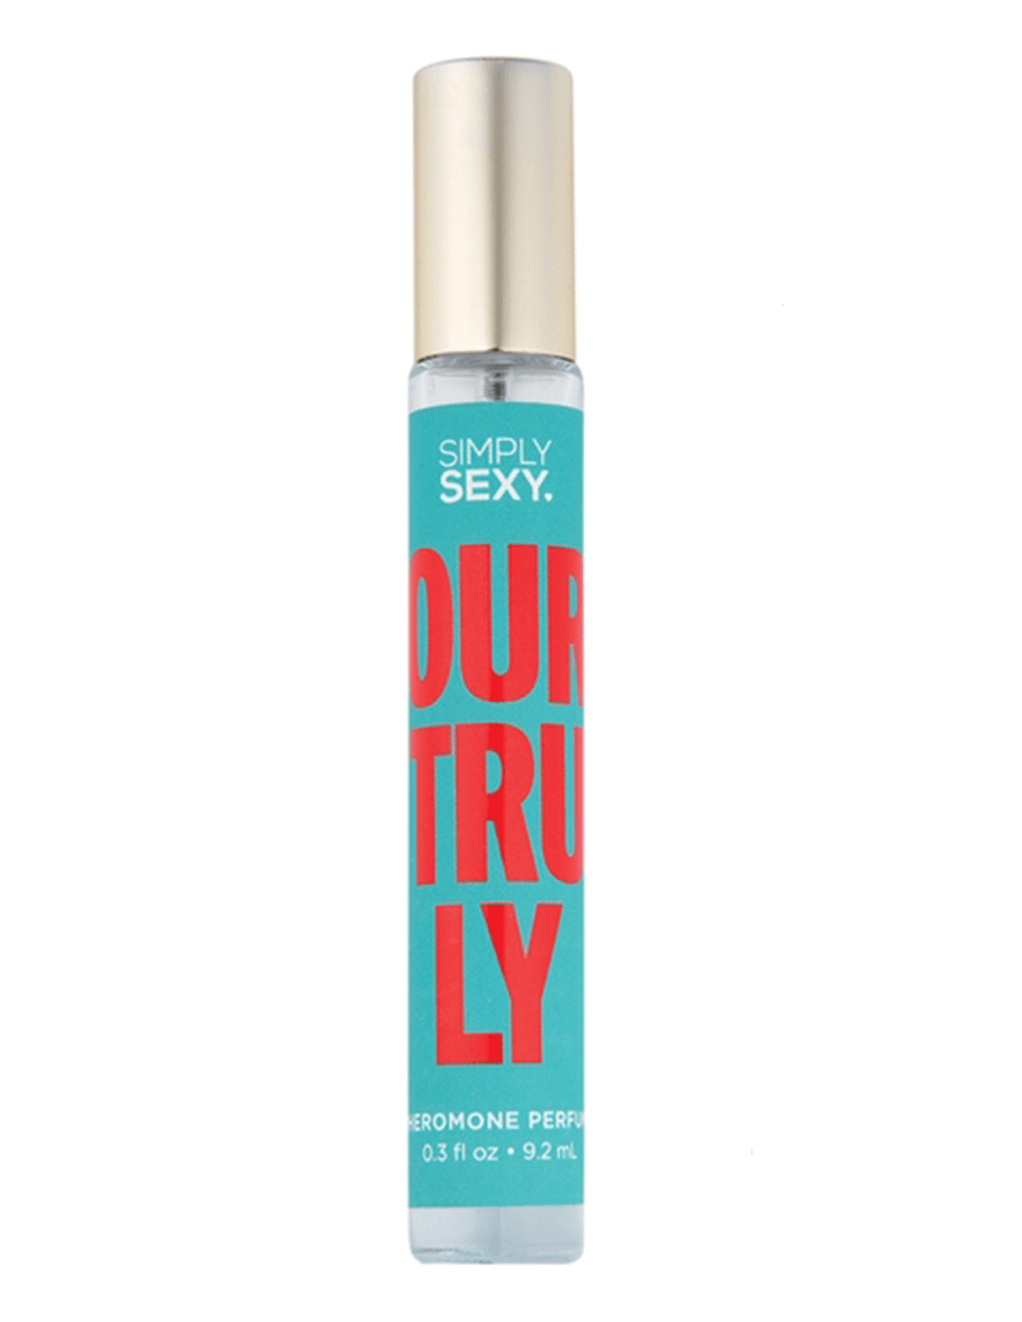 Simply Sexy Yours Truly Pheromone Perfume - Main